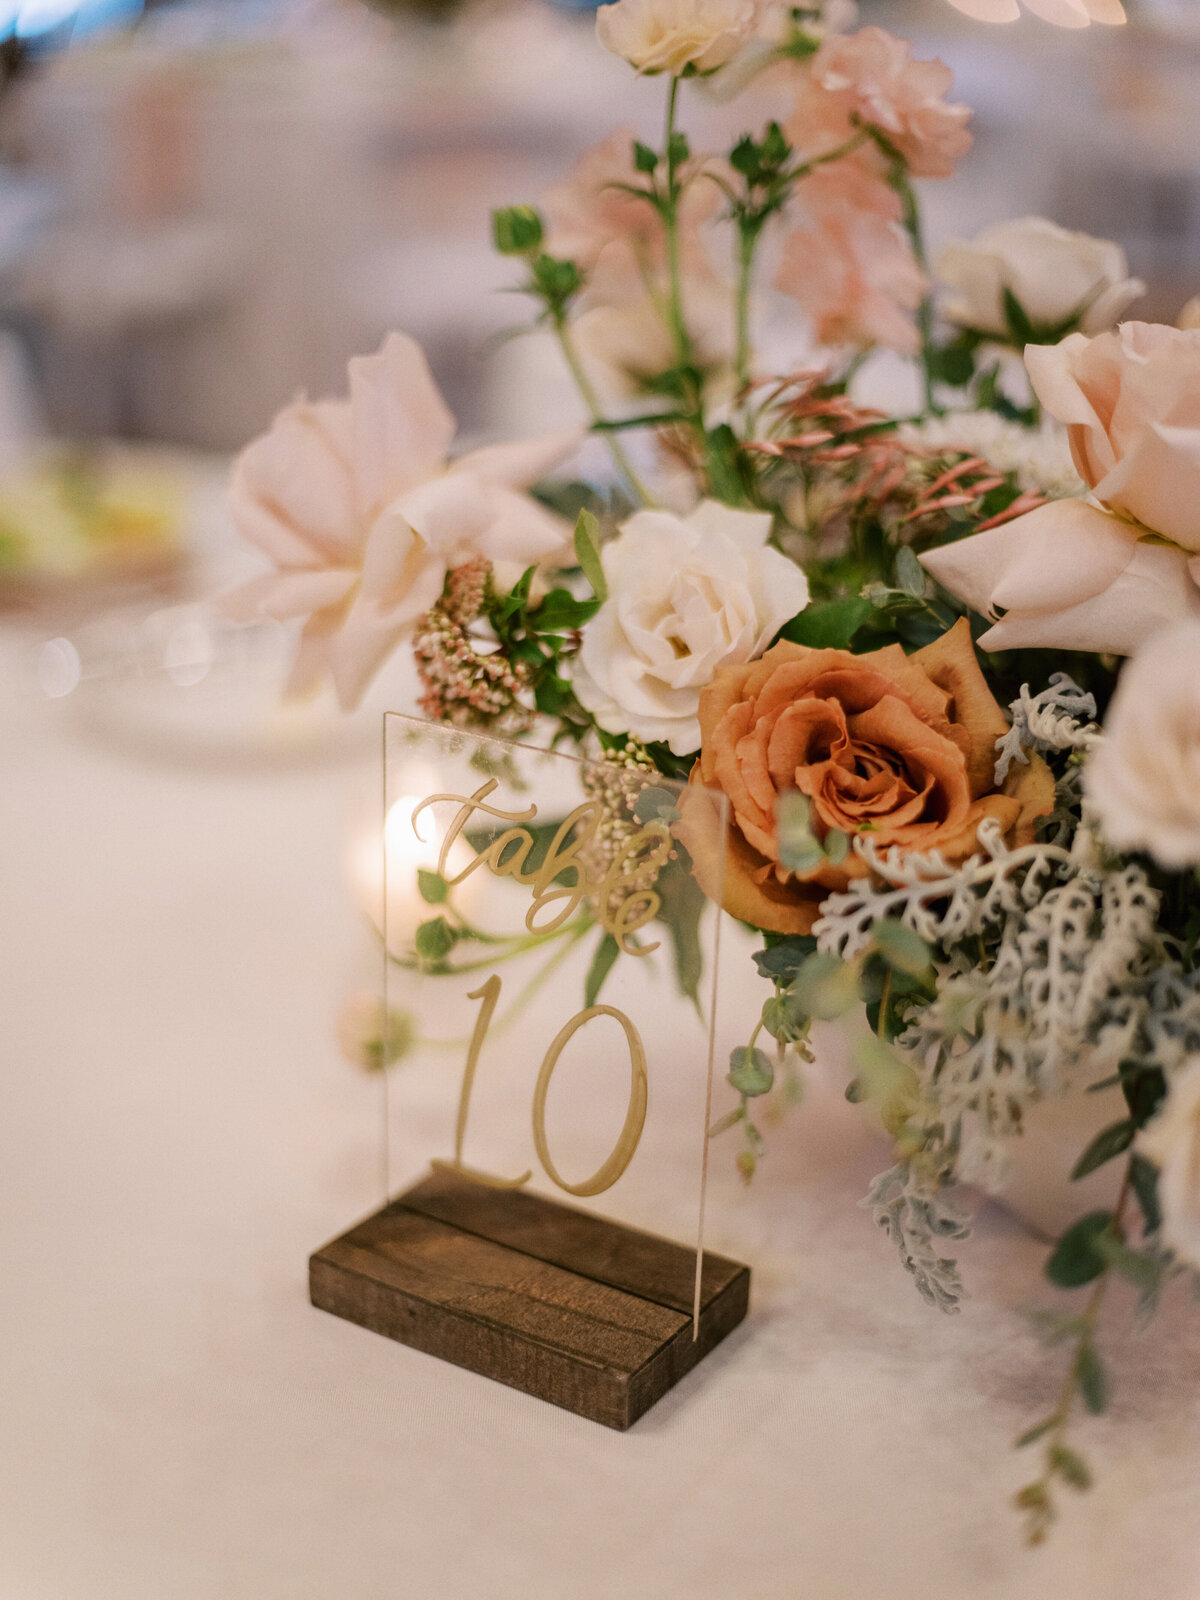 whimsical wedding centerpieces with acrylic table numbers